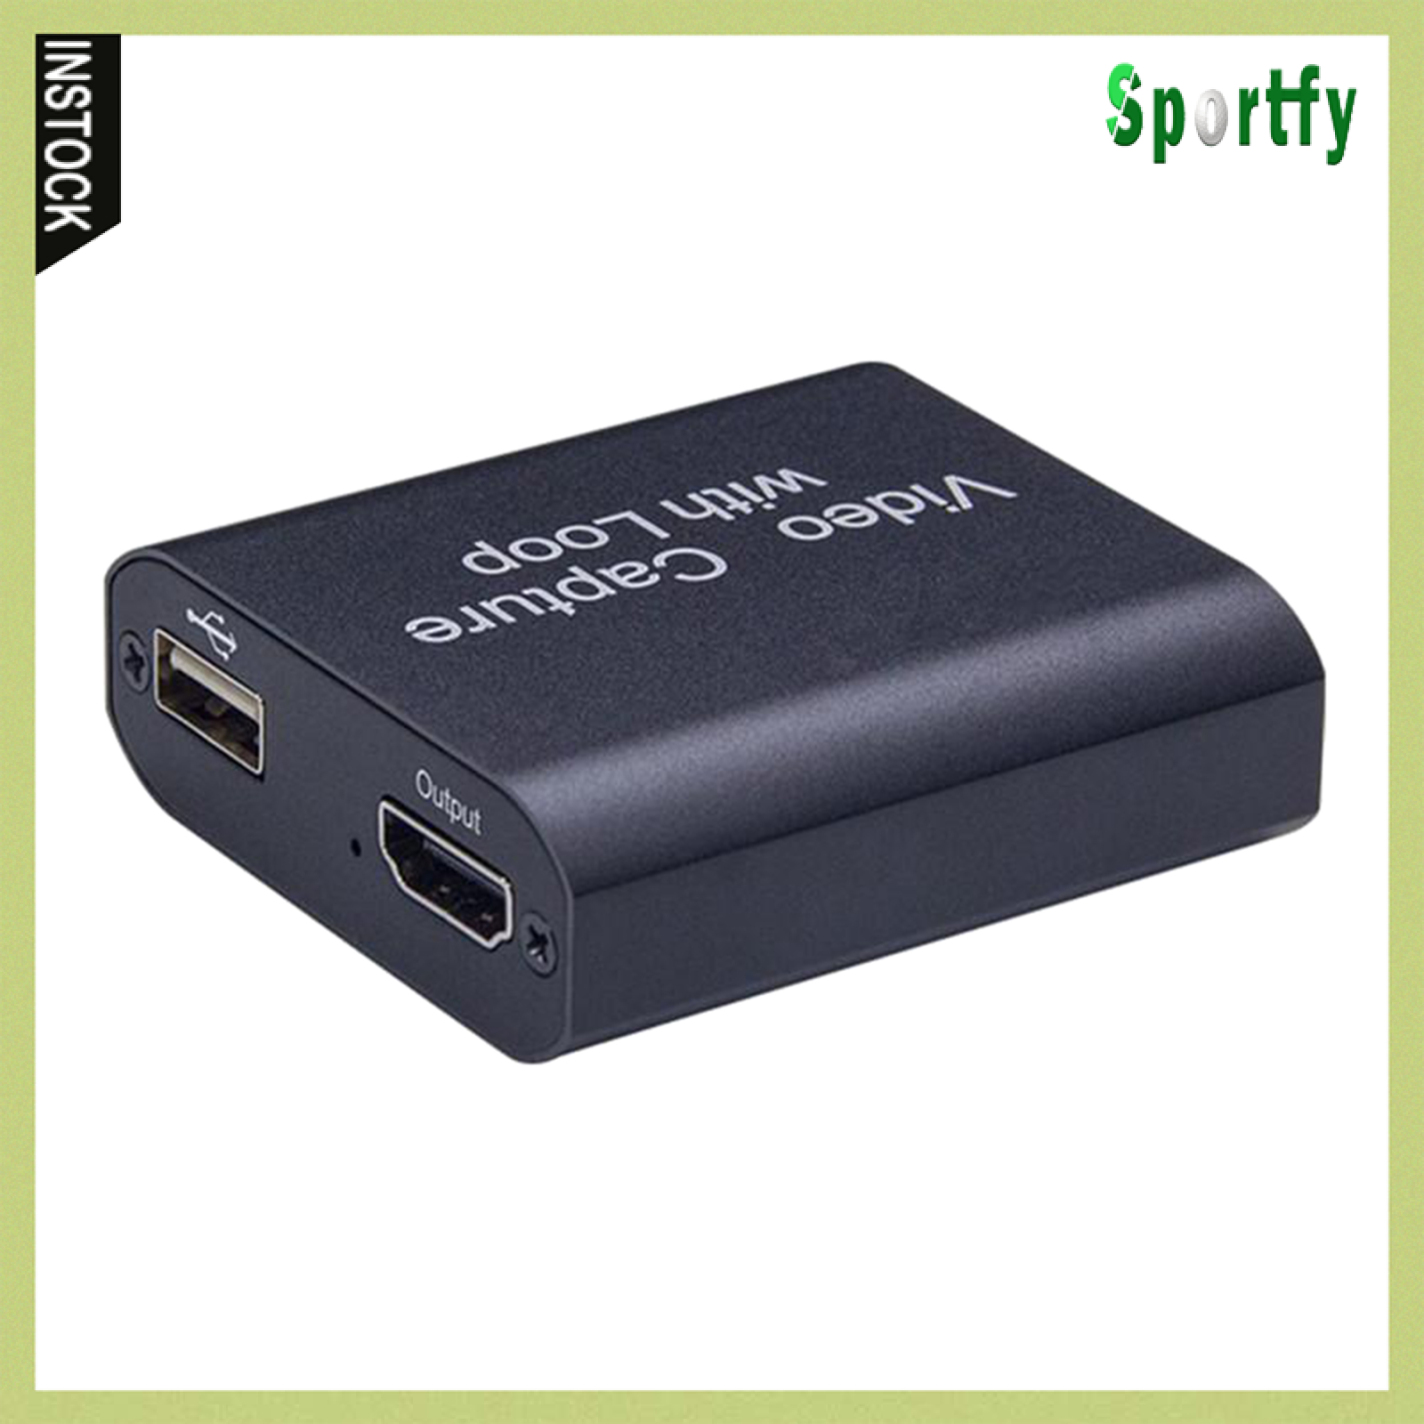 Sportfy USB 3.0 Portable HDMI Video Capture Card for High Definition Acquisition or